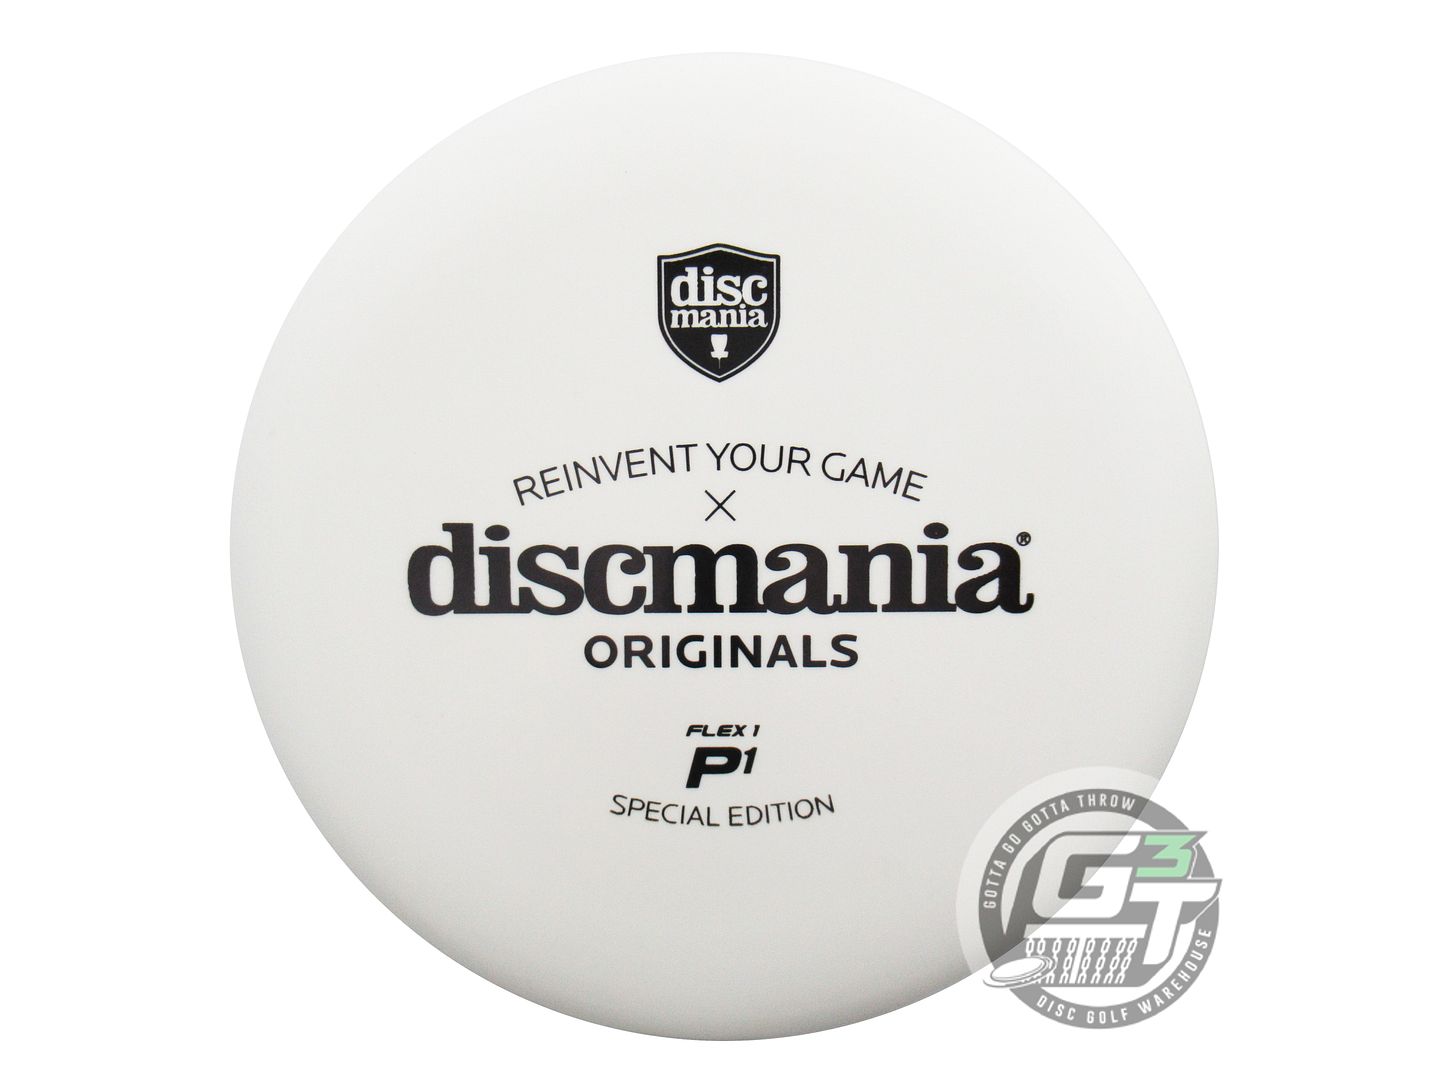 Discmania Special Edition D-Line Flex 1 P1 Putter Golf Disc (Individually Listed)